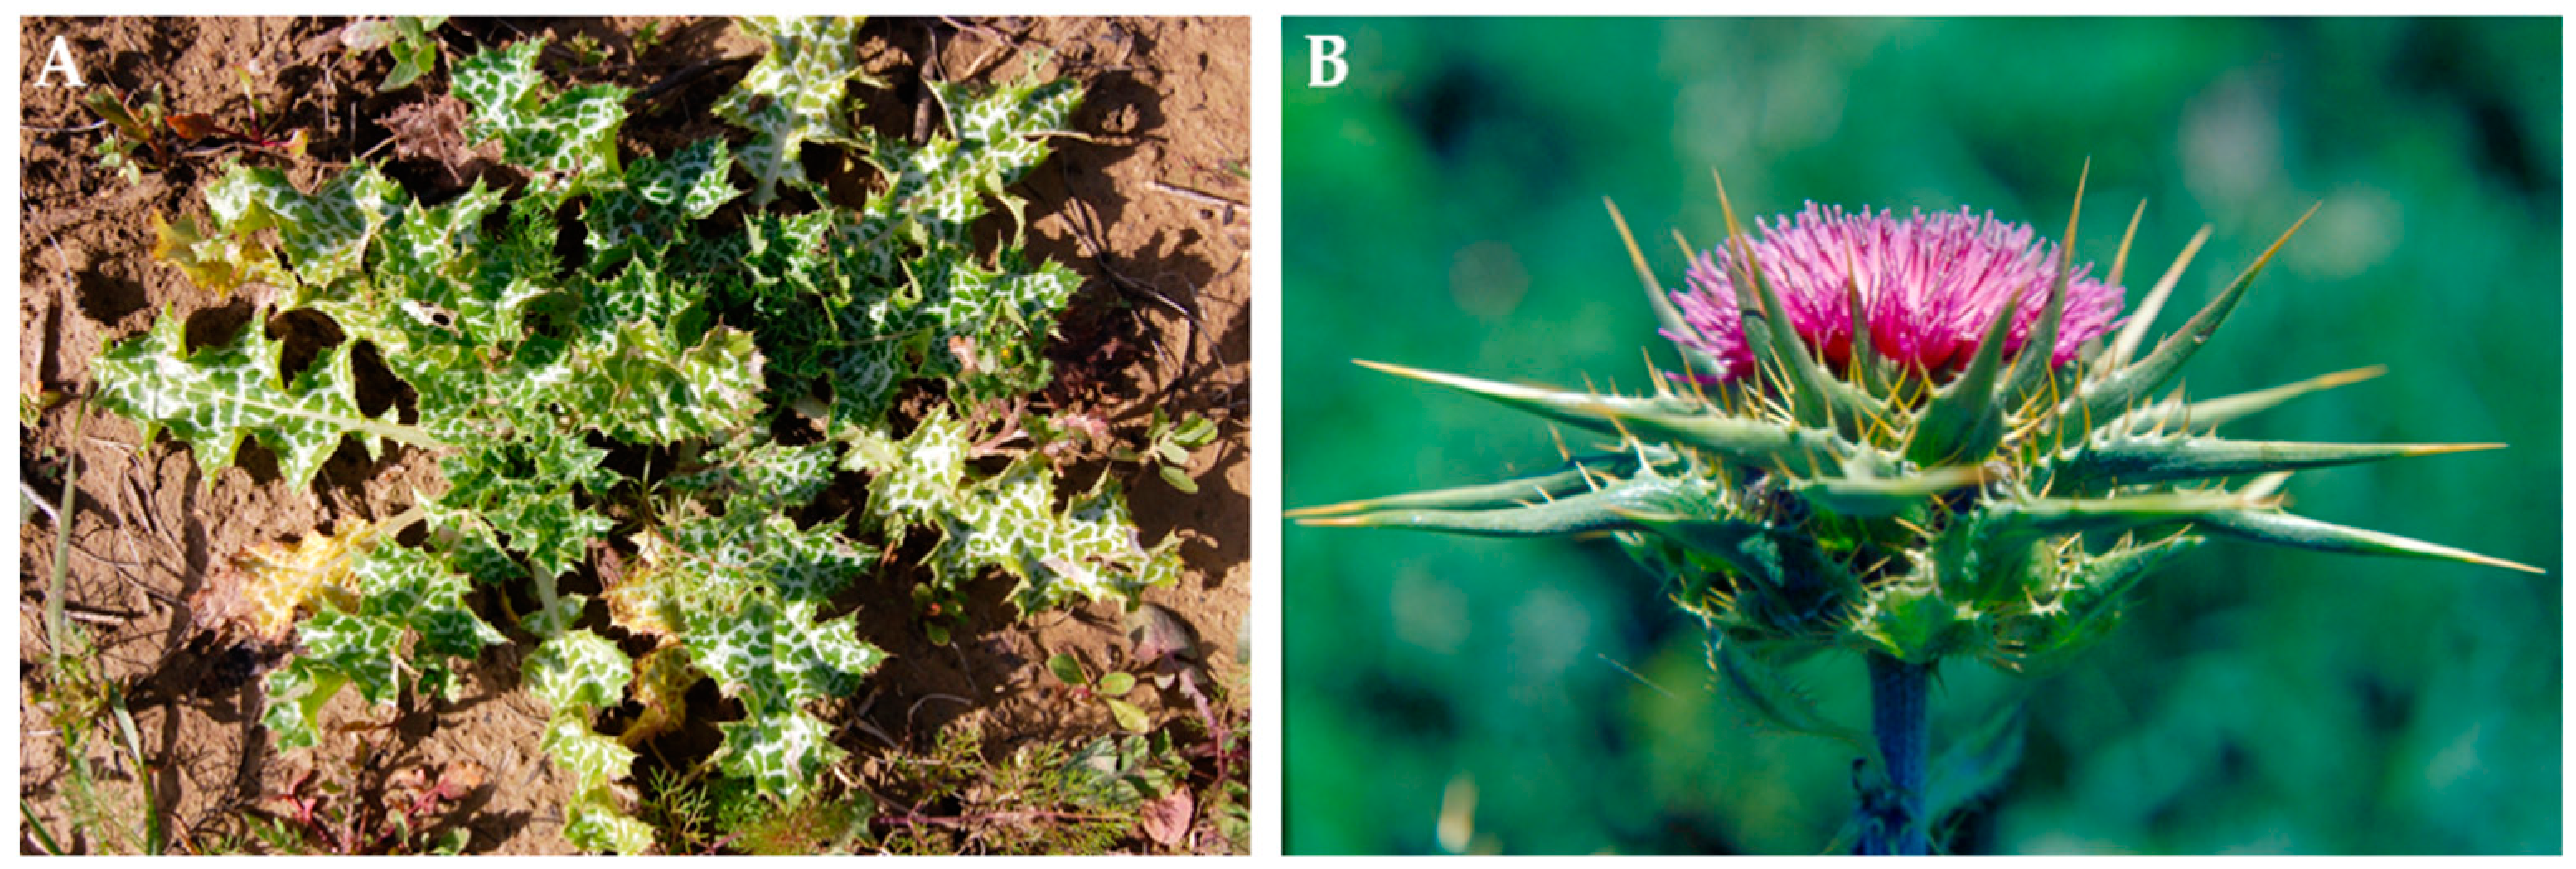 Agronomy | Free Full-Text | Milk Thistle (Silybum Marianum L.) as a Novel  Multipurpose Crop for Agriculture in Marginal Environments: A Review